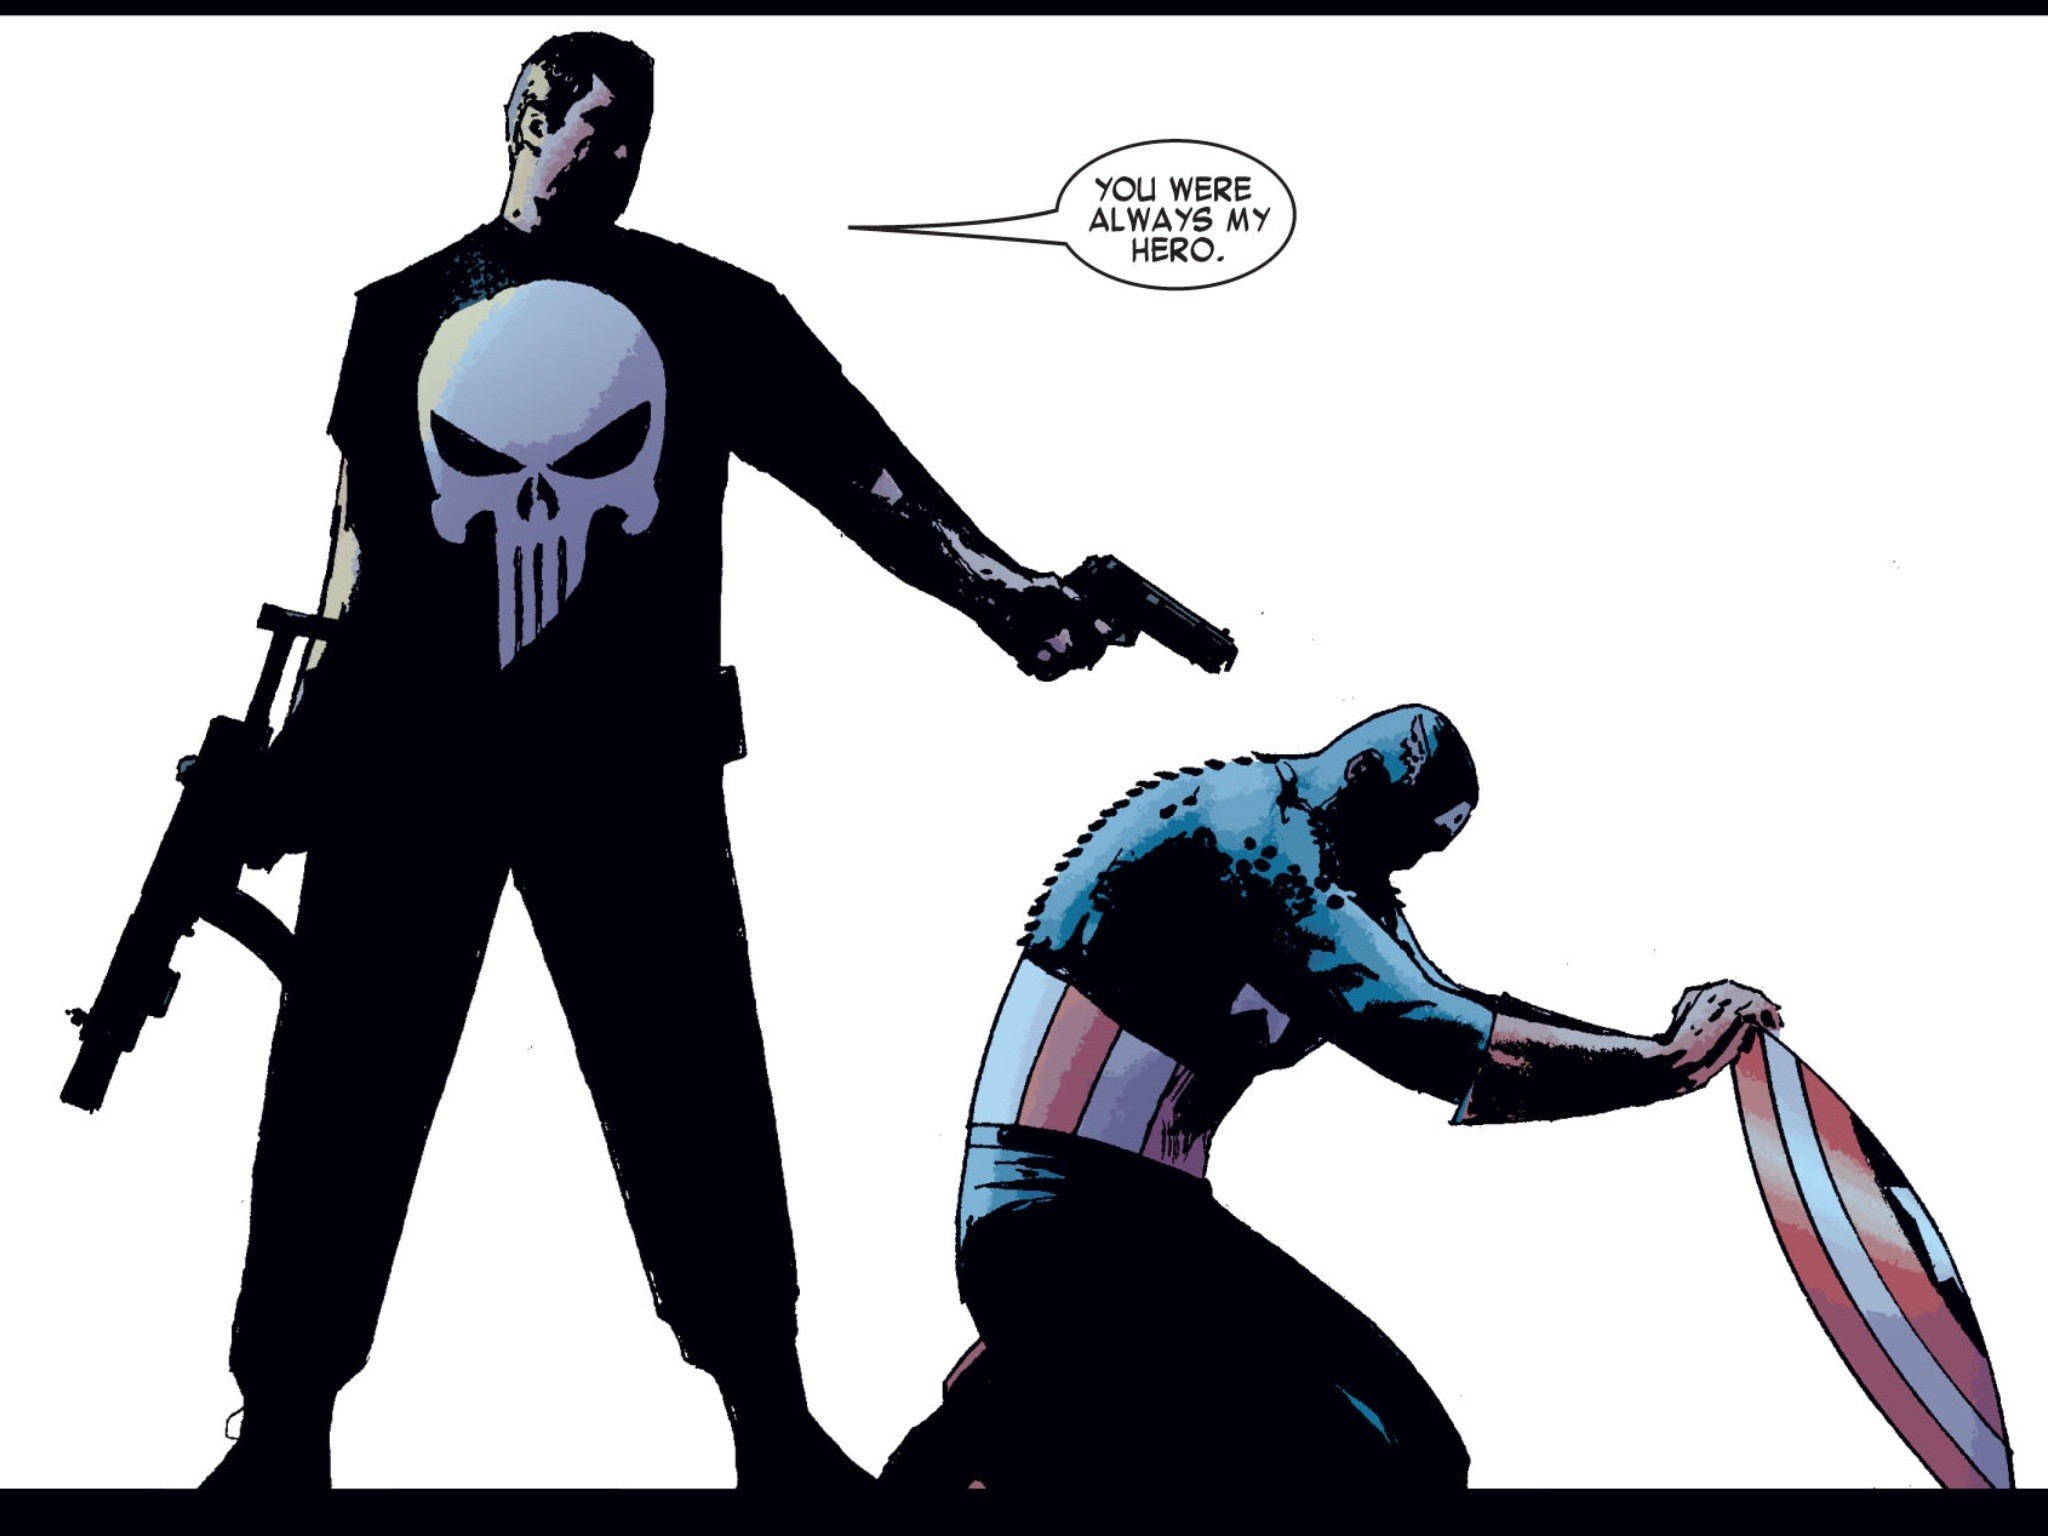 2048x1536 Reminds me of this from The Punisher ...